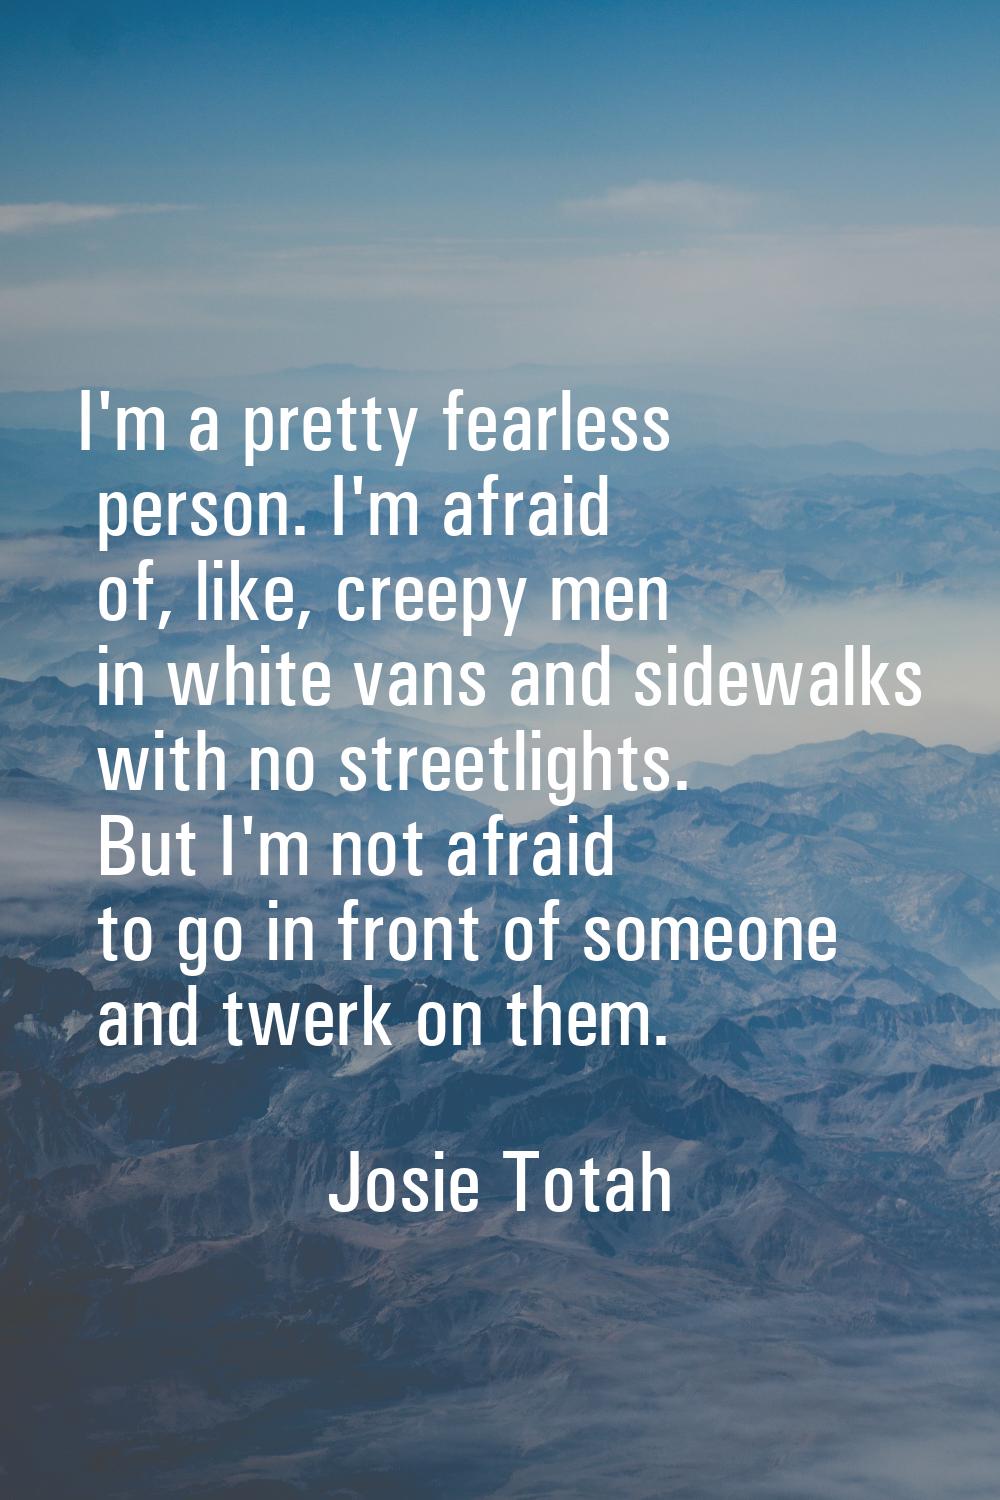 I'm a pretty fearless person. I'm afraid of, like, creepy men in white vans and sidewalks with no s